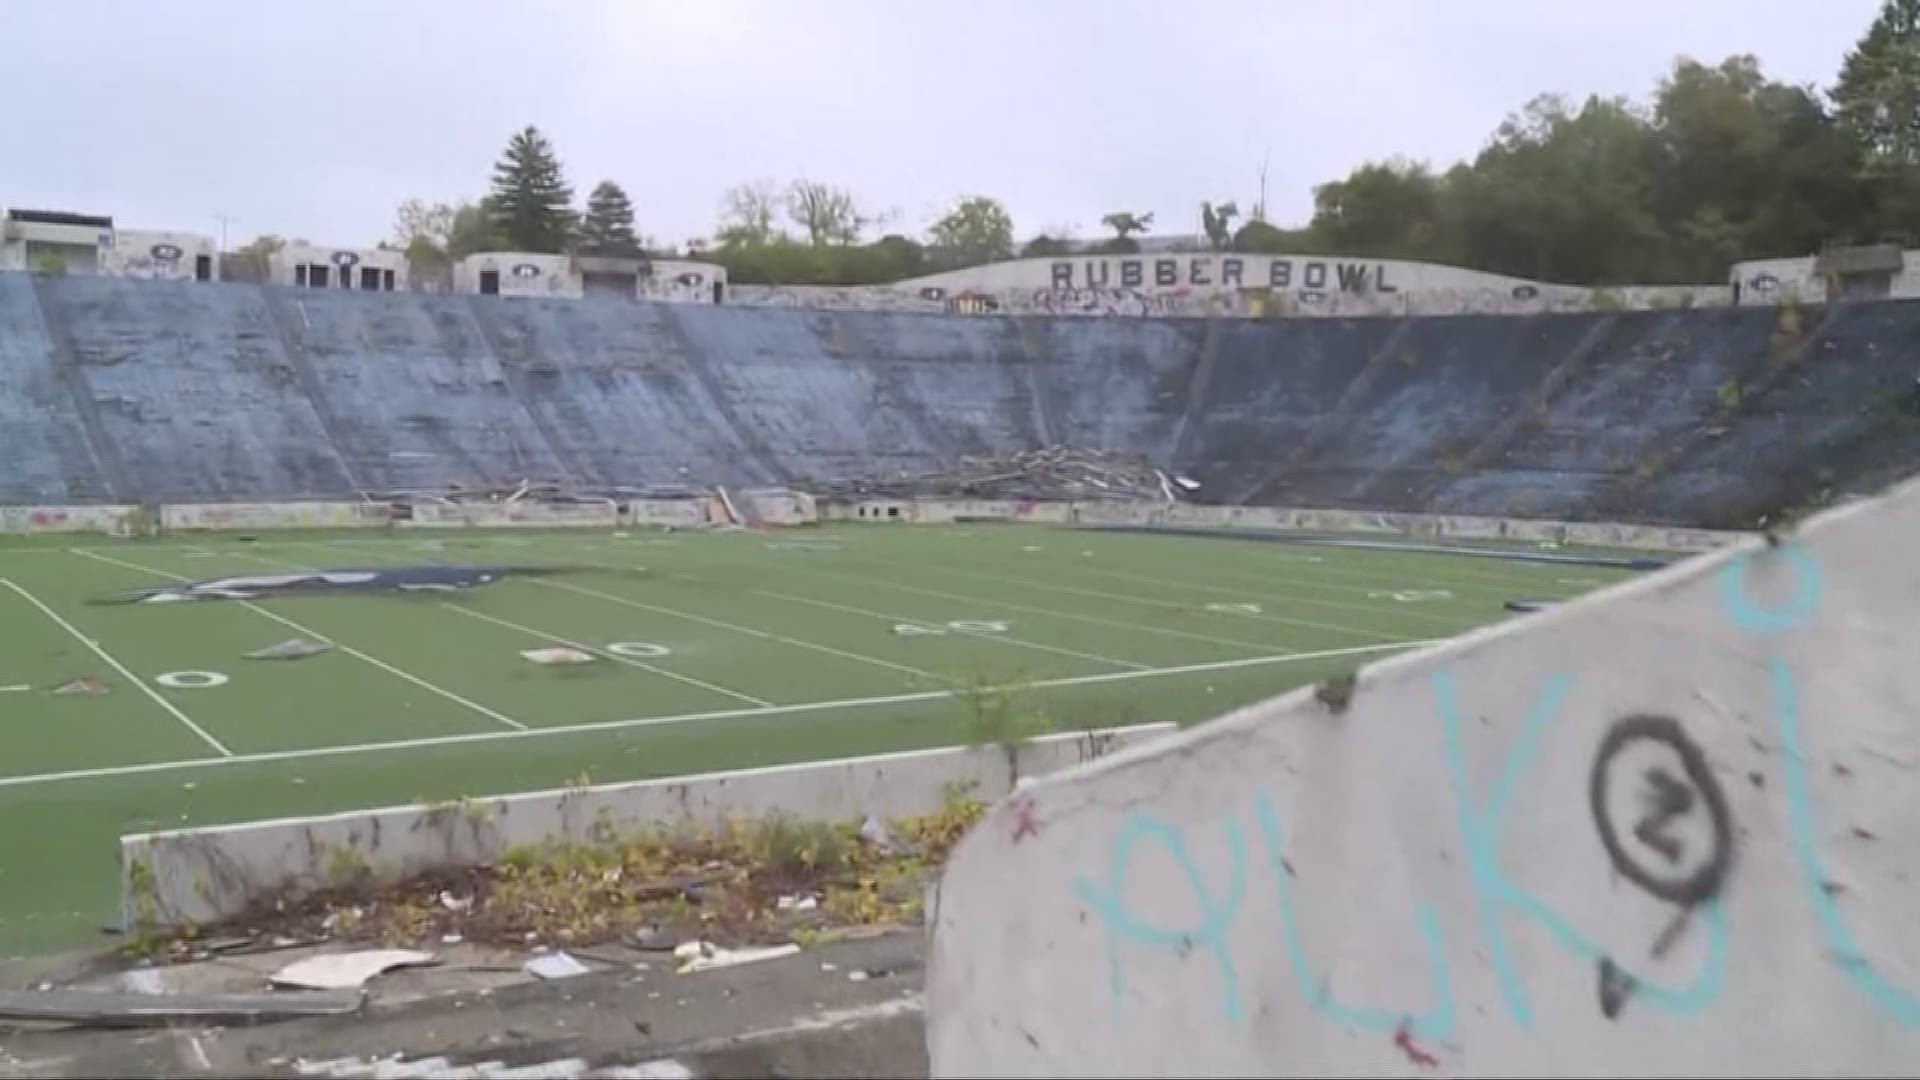 City of Akron to begin demolition of Rubber Bowl